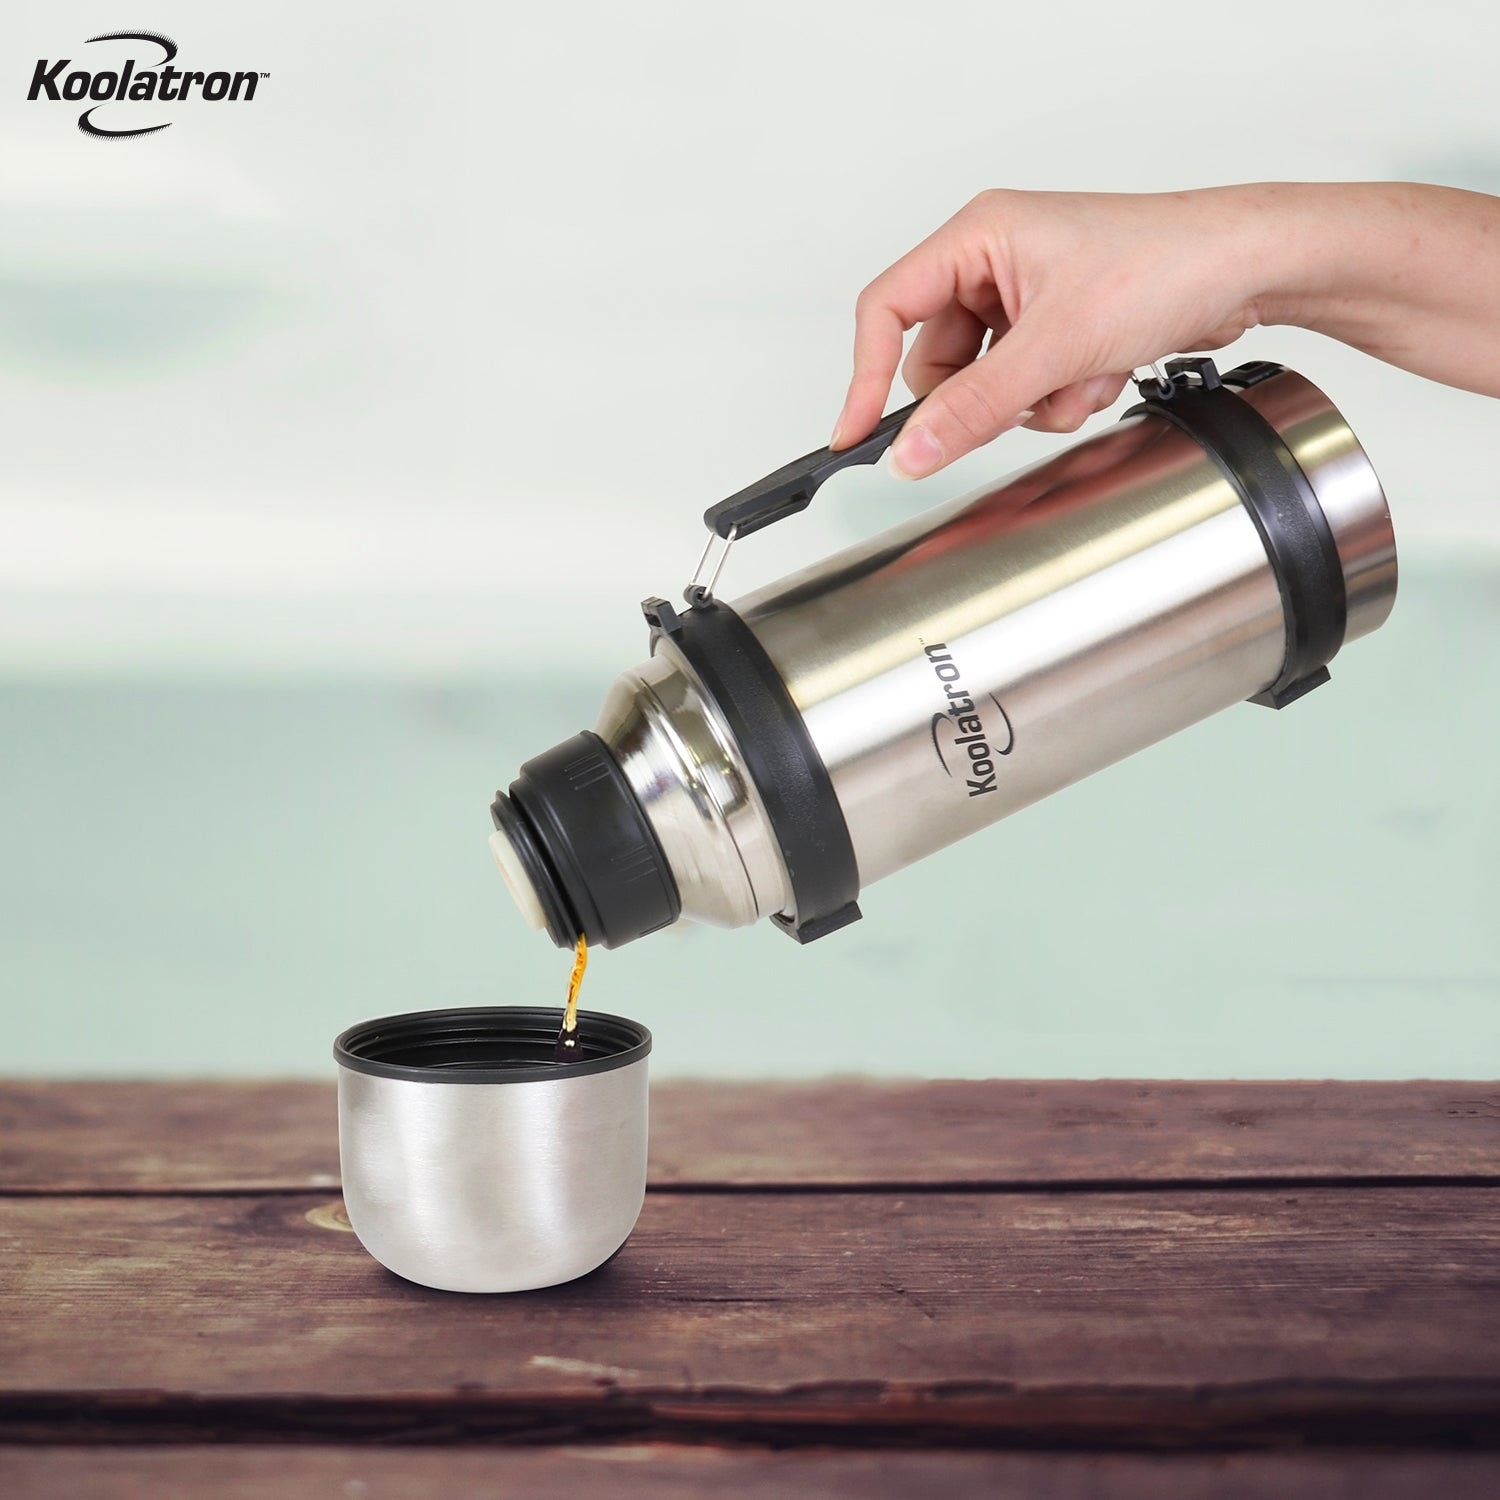 https://ak1.ostkcdn.com/images/products/is/images/direct/b814f1df64ee0d2a62f4afb7c12a37854daeec8d/Koolatron-12V-Insulated-Vacuum-Flask-with-Heater%2C-1L-Stainless-Steel.jpg